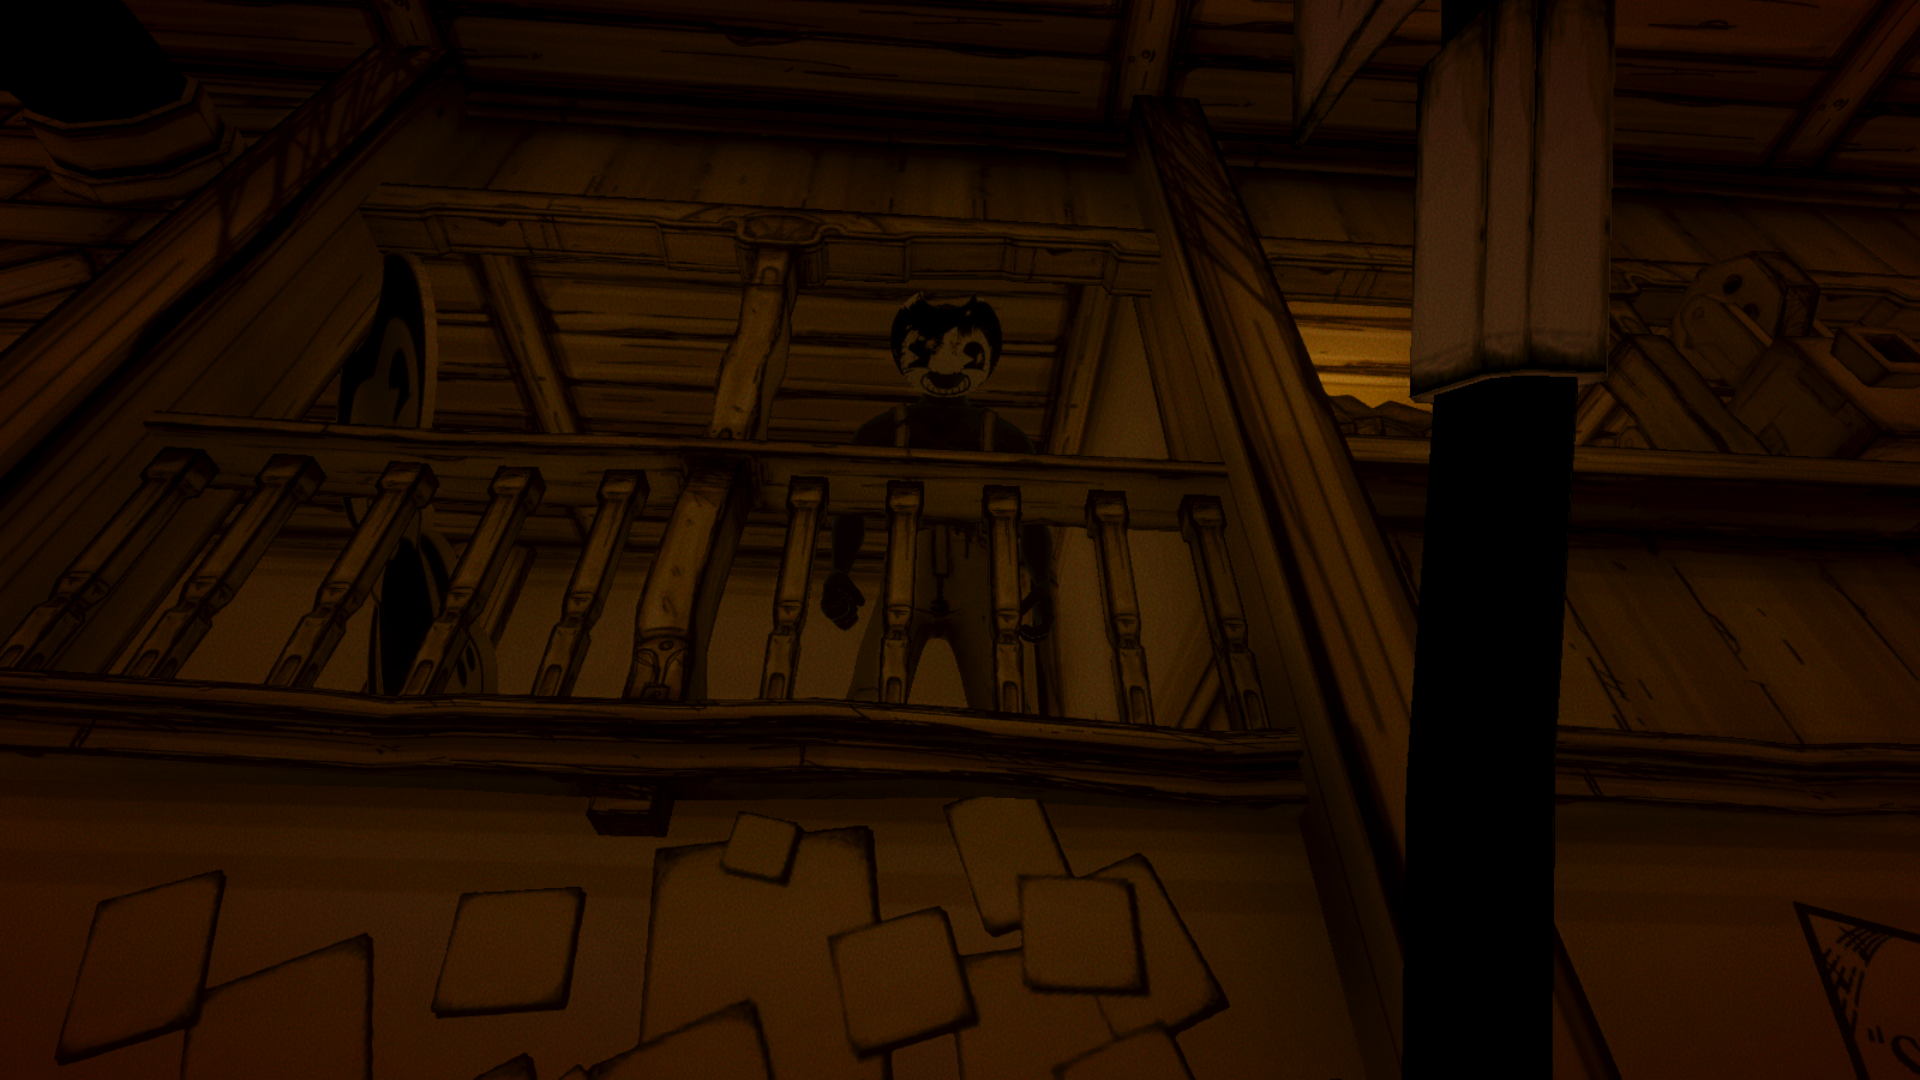 daily bendy and the ink machine facts on X: In batim sammy is one of the  only characters that doesnt kill anyone in the game. The only character he  attempts to hurt